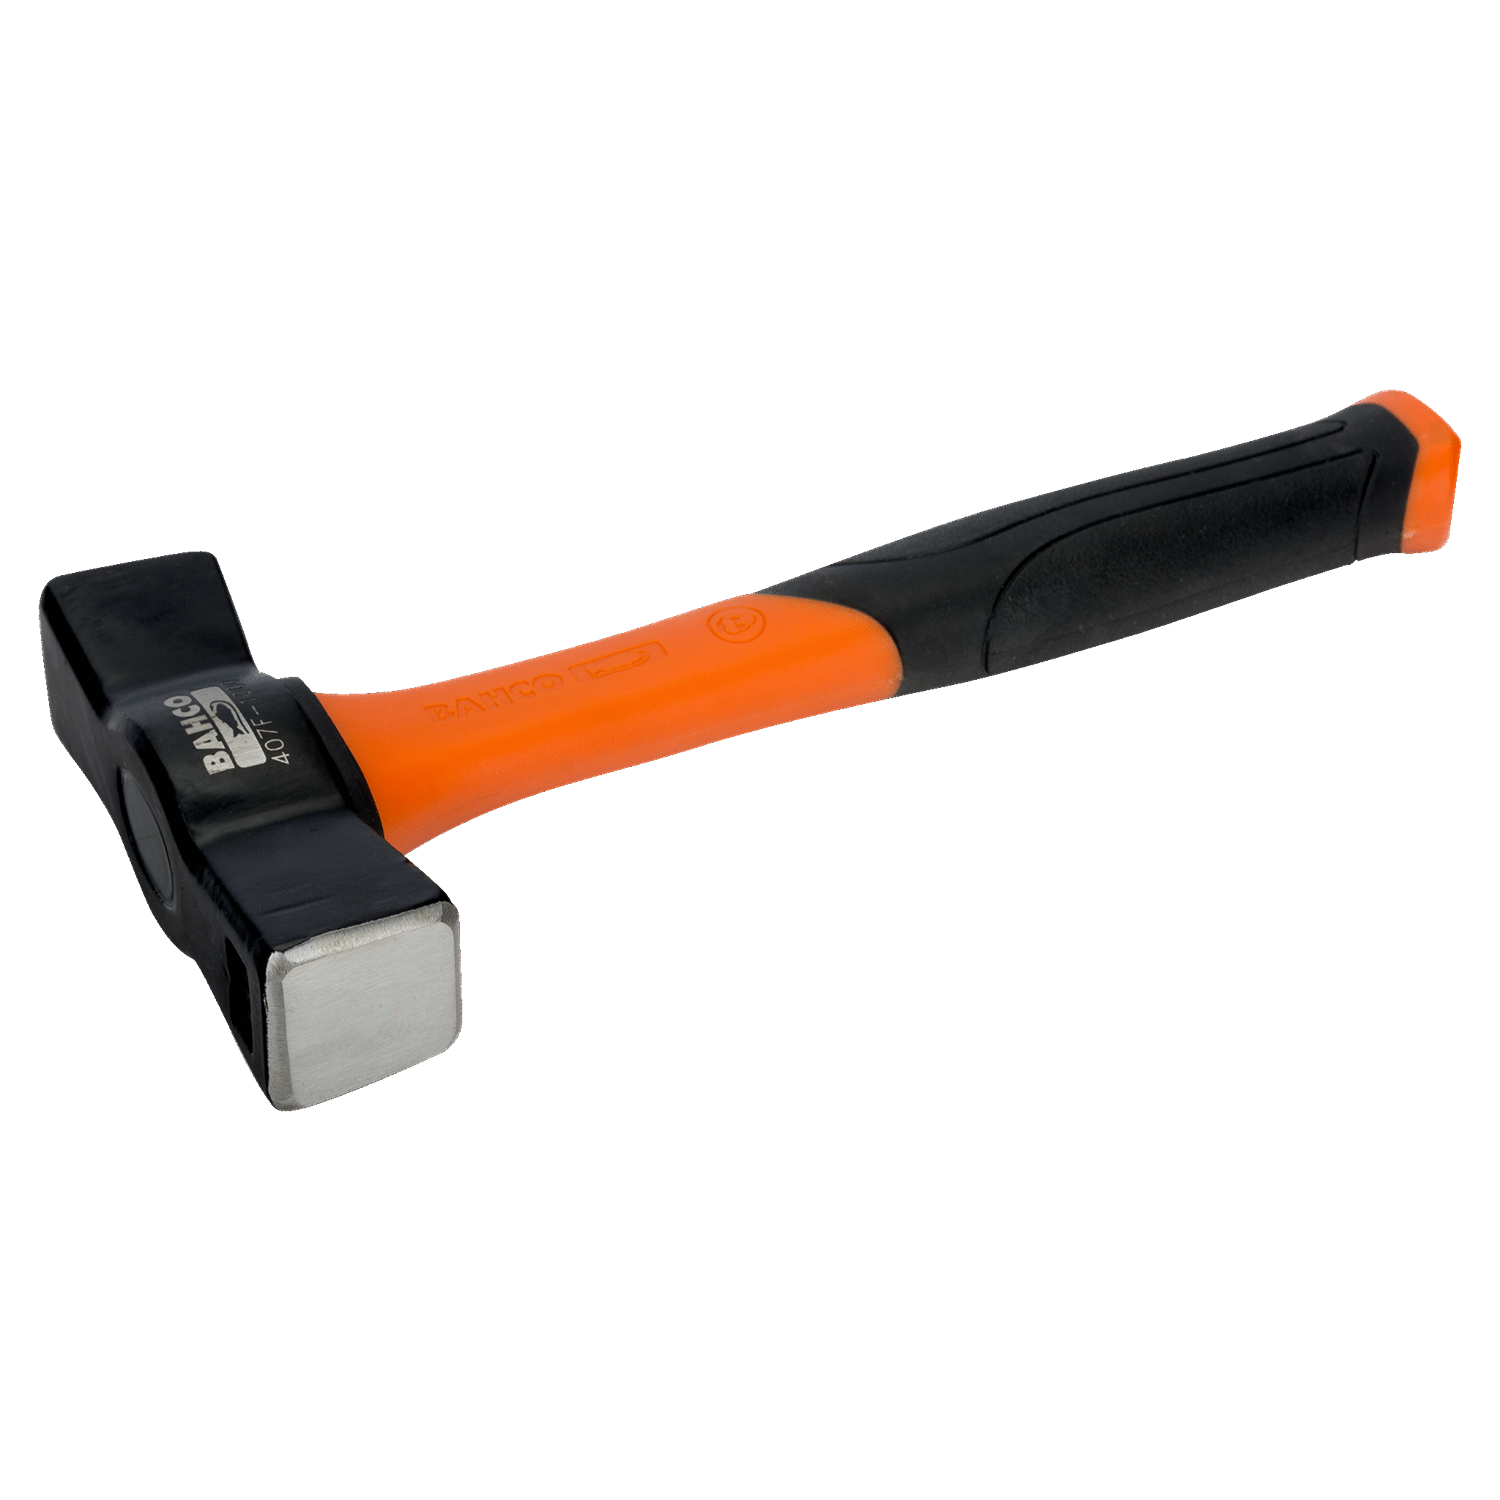 BAHCO 407F Club Hammer with Fibreglass Handle (BAHCO Tools) - Premium Club Hammer from BAHCO - Shop now at Yew Aik.